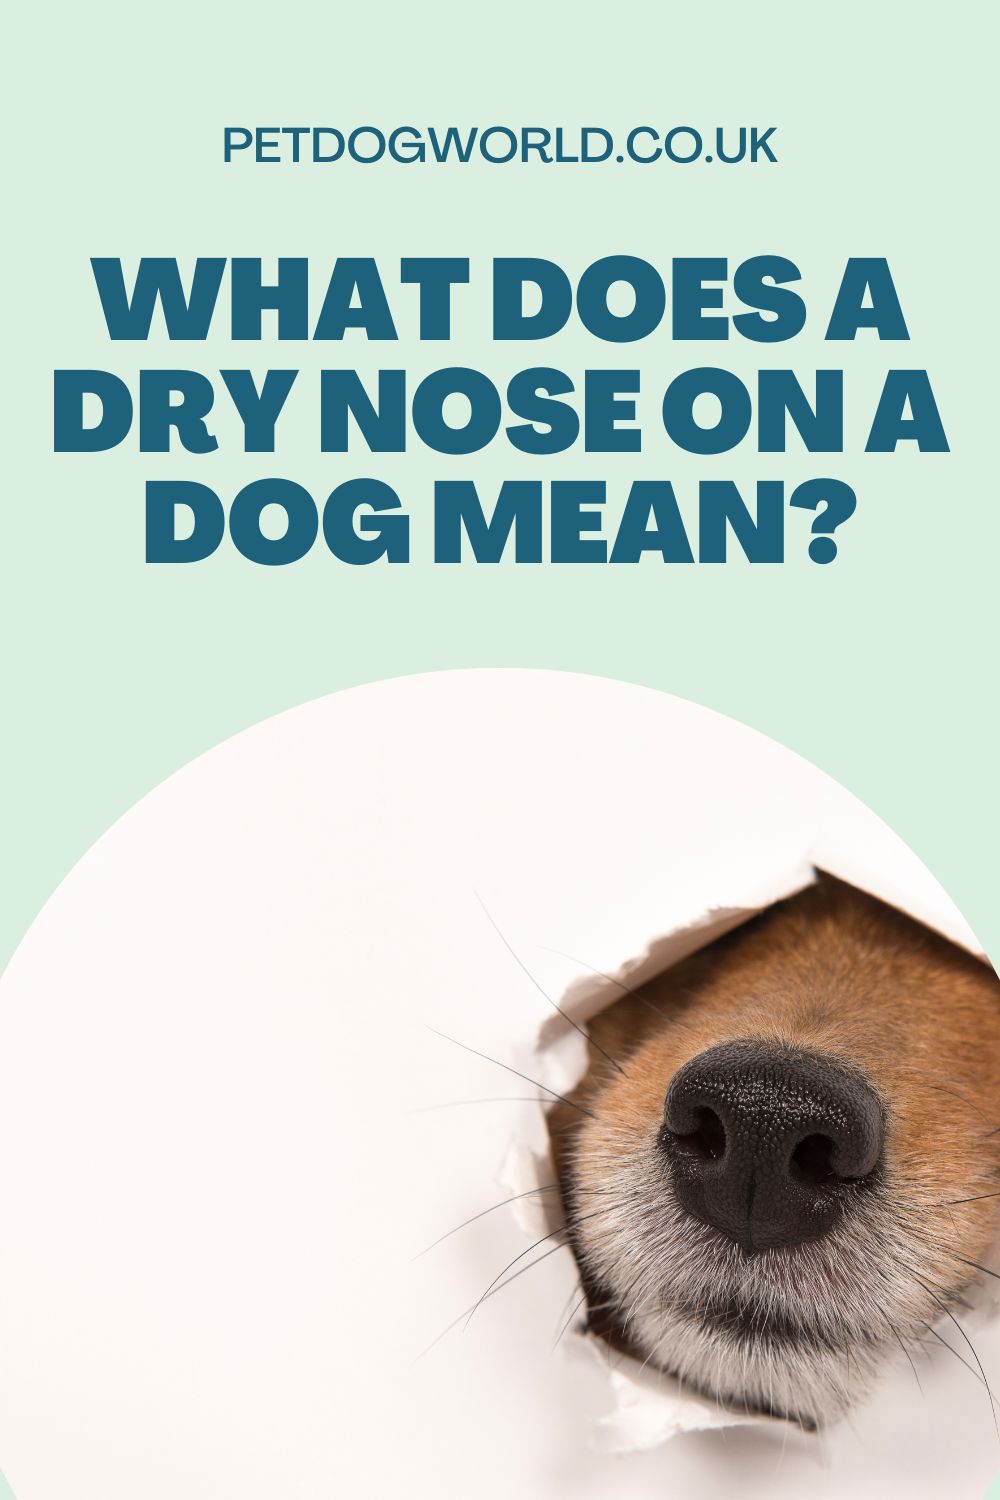 Read about what causes a dry nose in dogs and learn how to remedy it. Explore environmental factors, dehydration, allergies, and more.